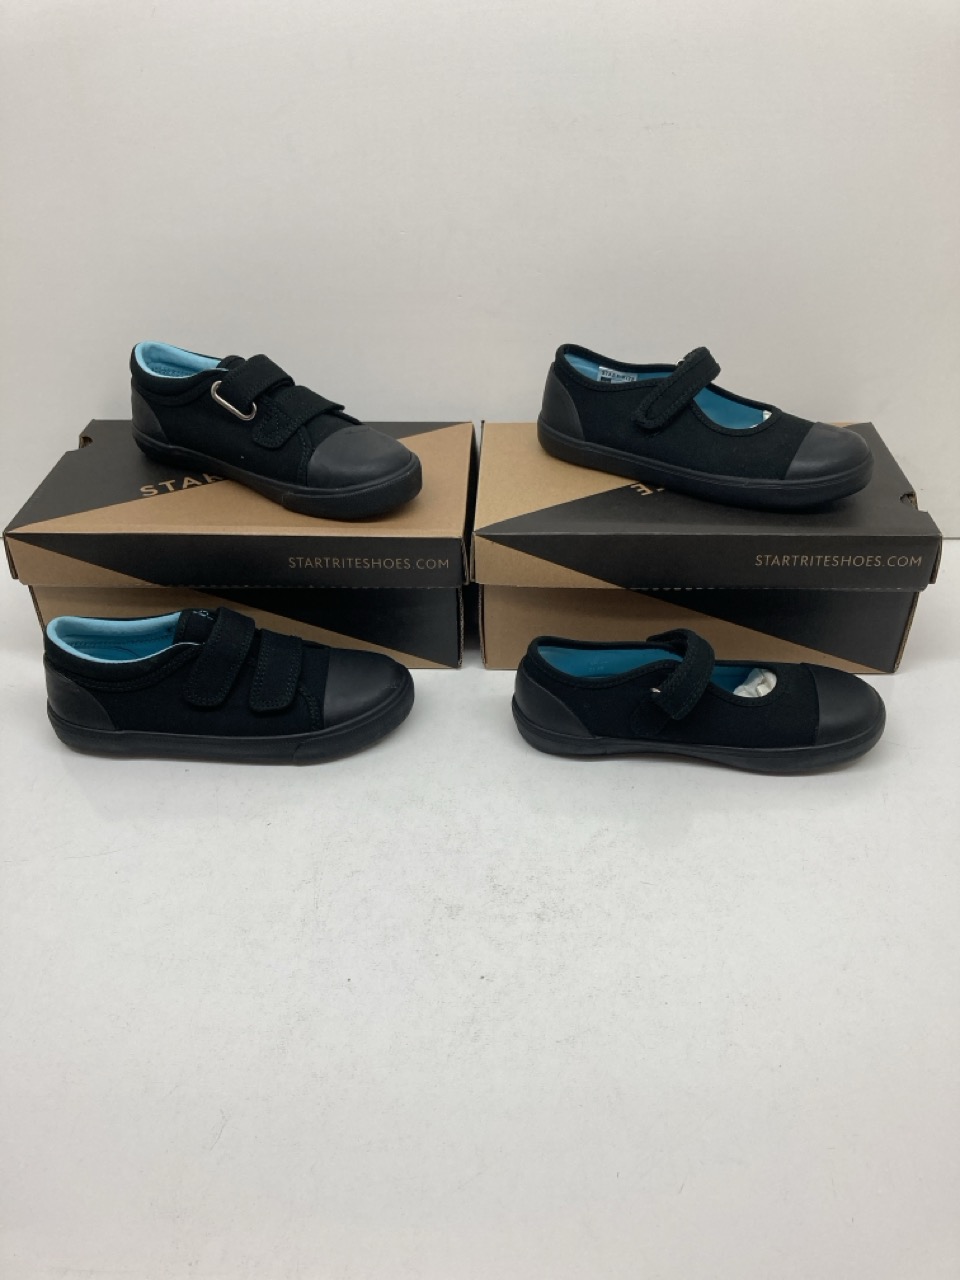 4 X PAIRS OF START RITE SHOES TO INCLUDE A PAIR OF JUMPING SHOES, BLACK, SIZE EU29